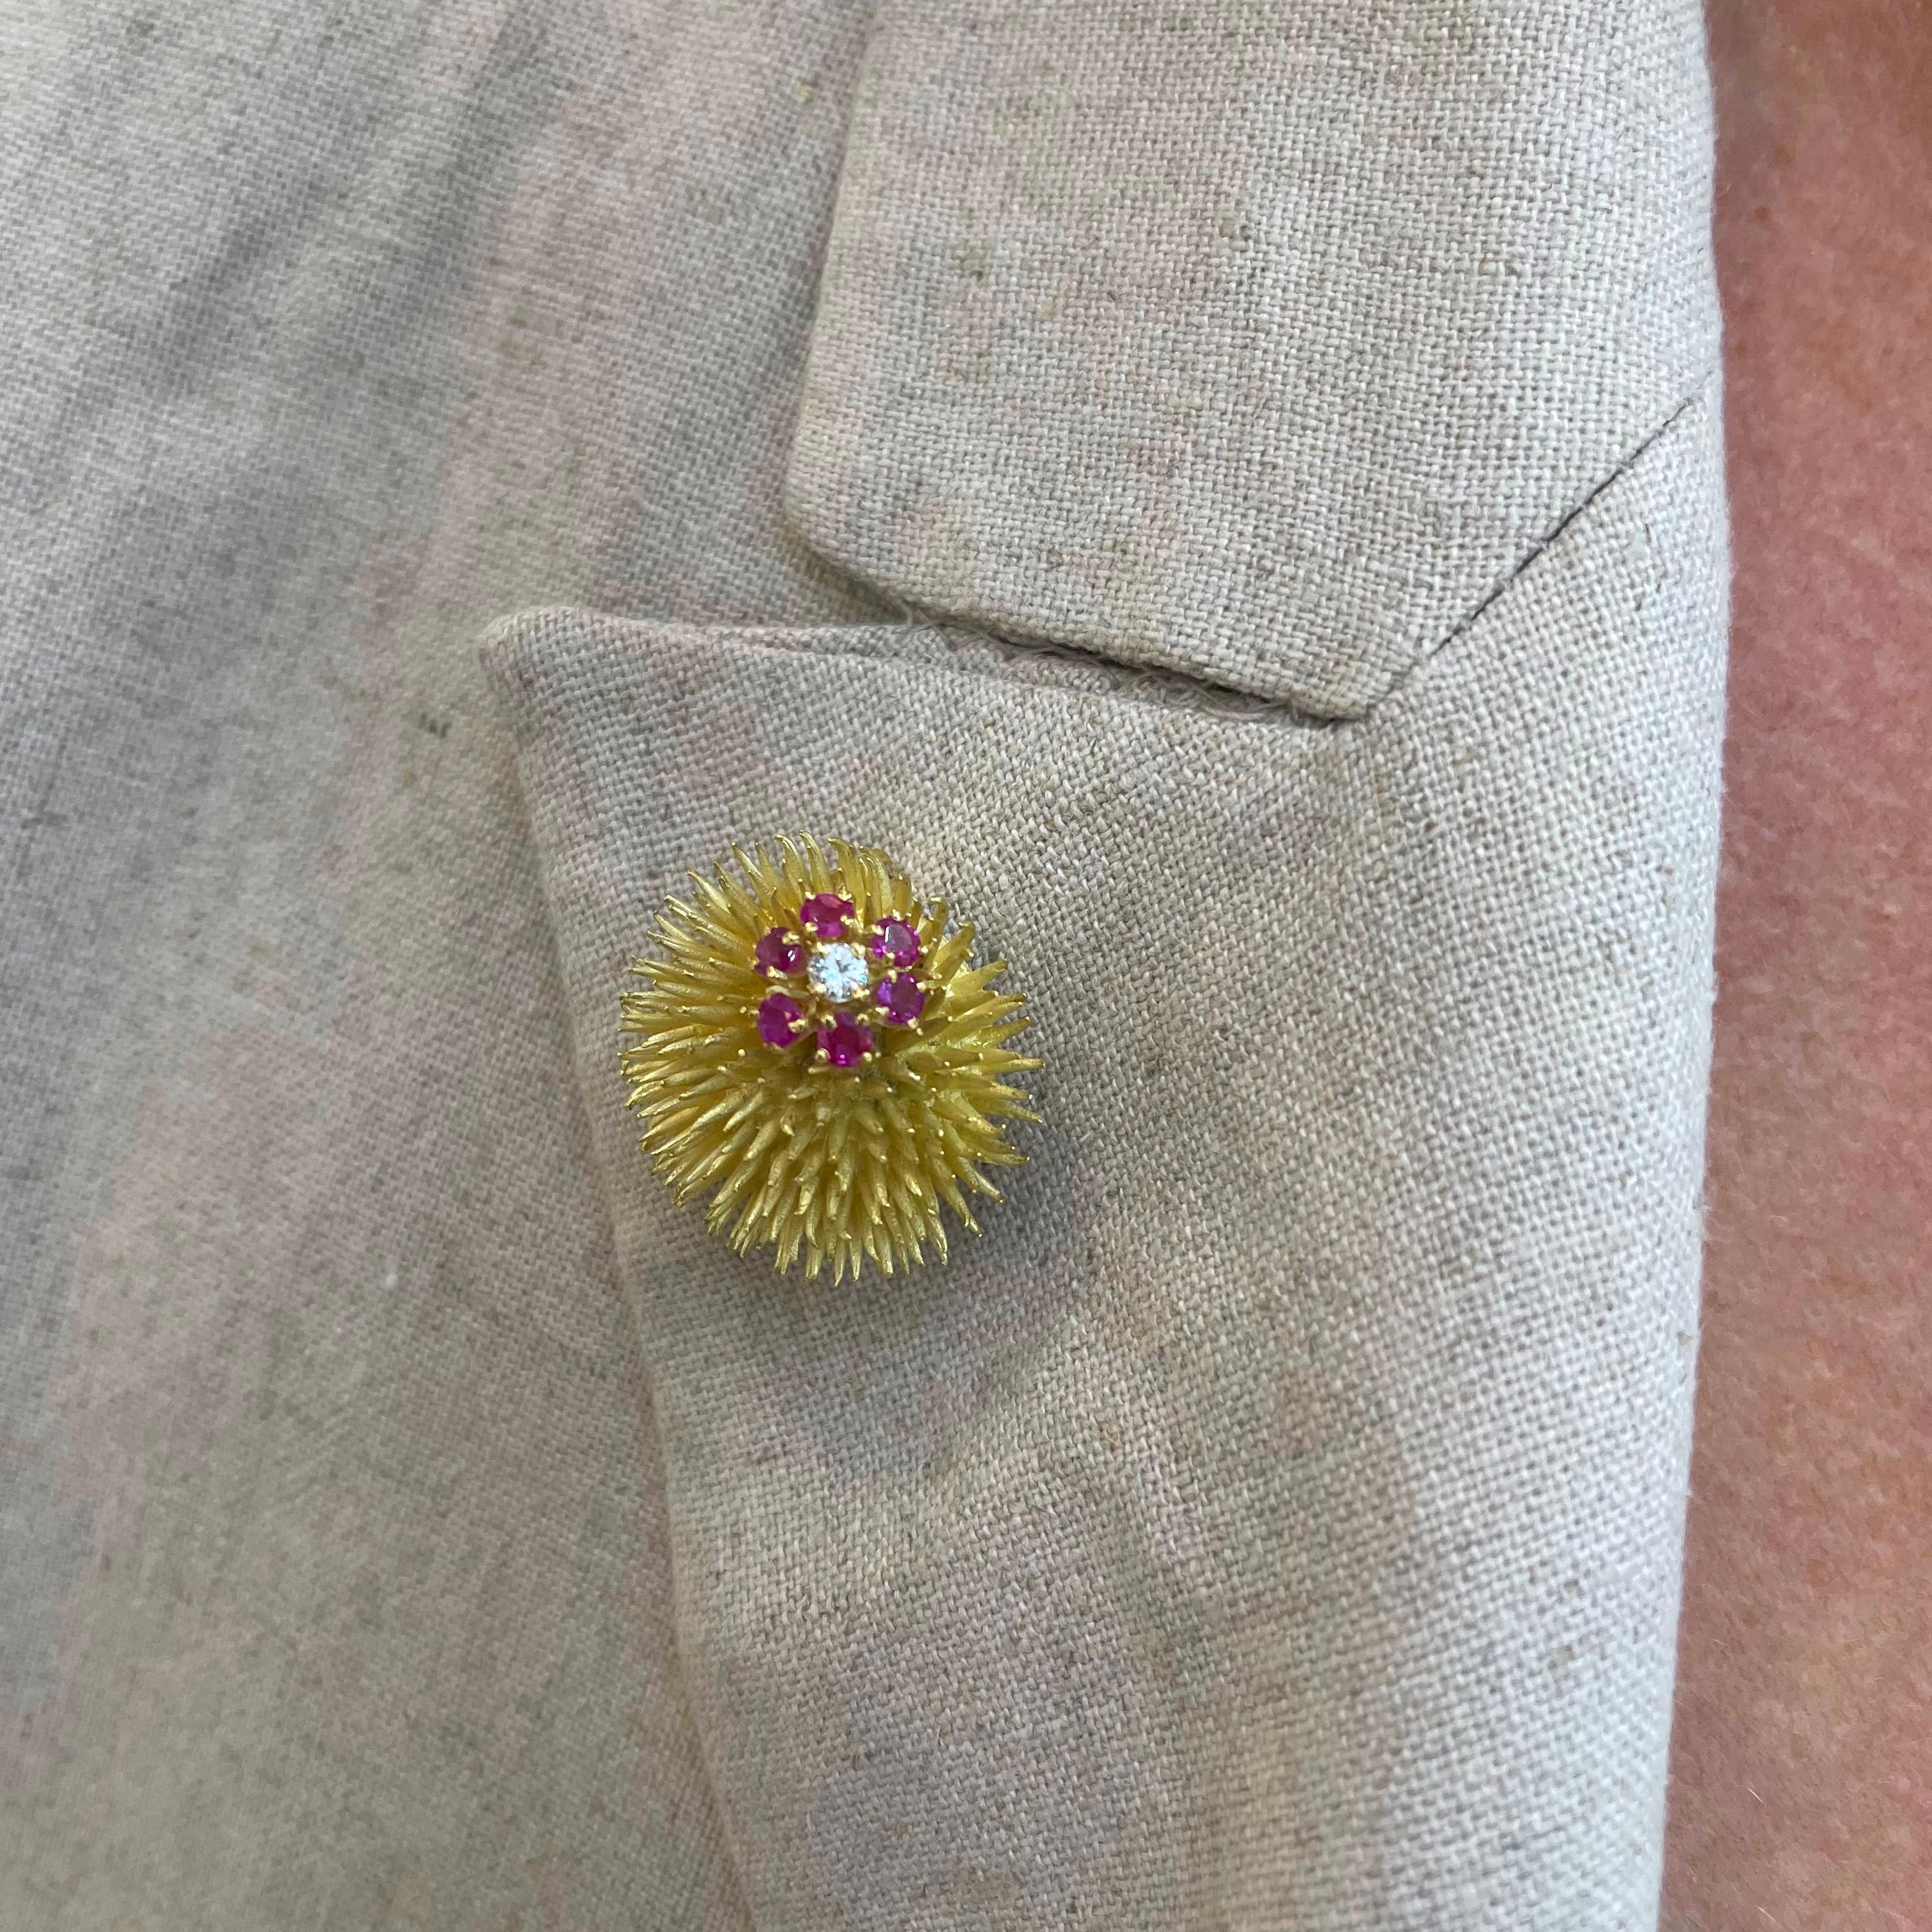 Brand: Tiffany & Co.

Gender: Ladies

Metal Type: 18K Yellow Gold

Diameter: 1.00 inches

Weight: 17.02 grams

18K Yellow Gold Diamond and ruby vintage brooch. The metal was tested and determined to be 18K yellow gold. The 